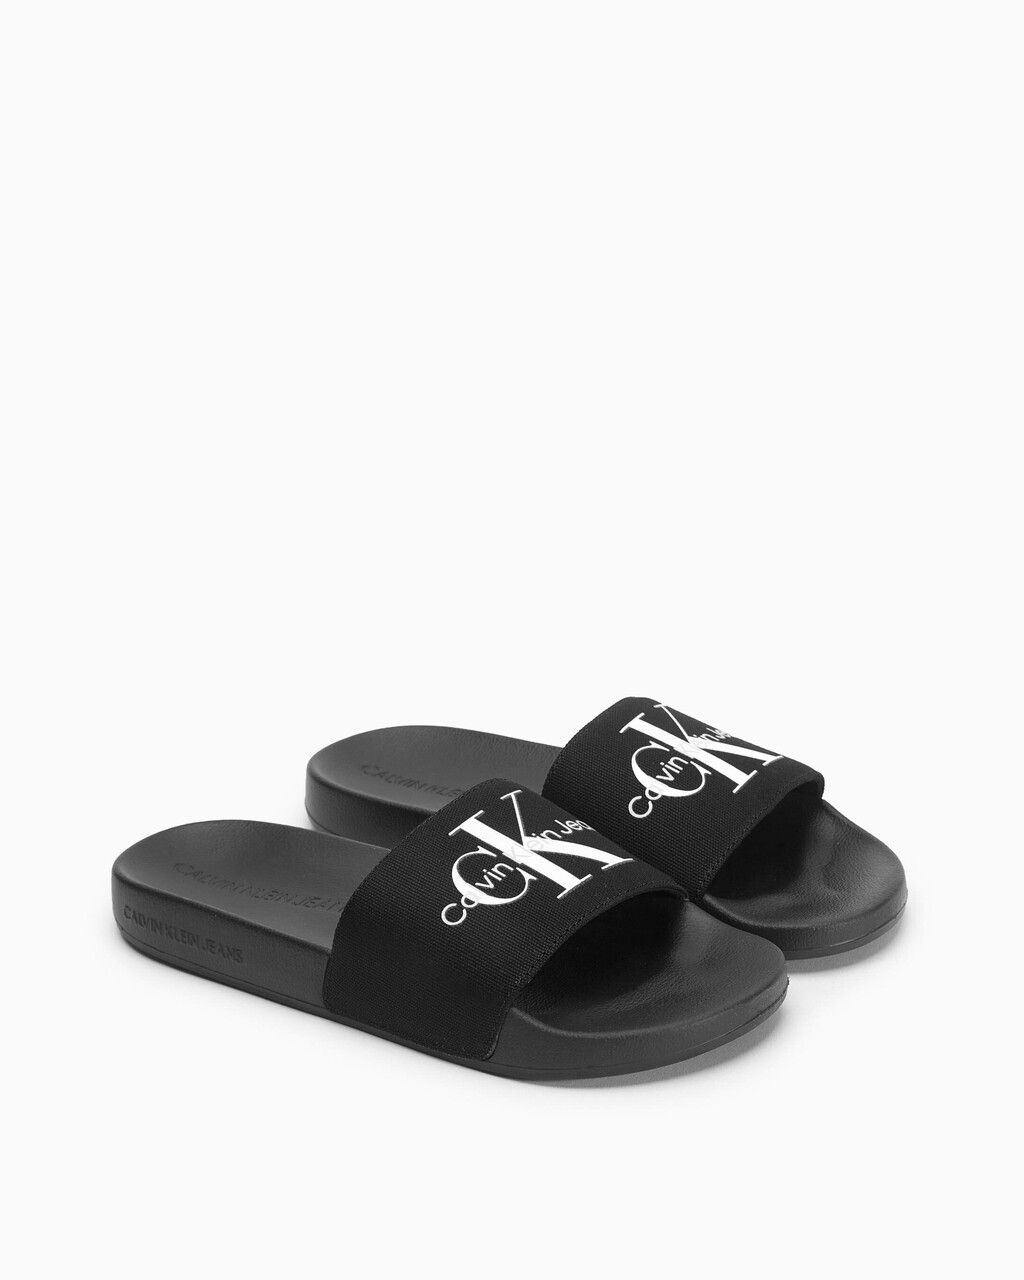 RECYCLED CANVAS SLIDERS, Black/Bright White, hi-res